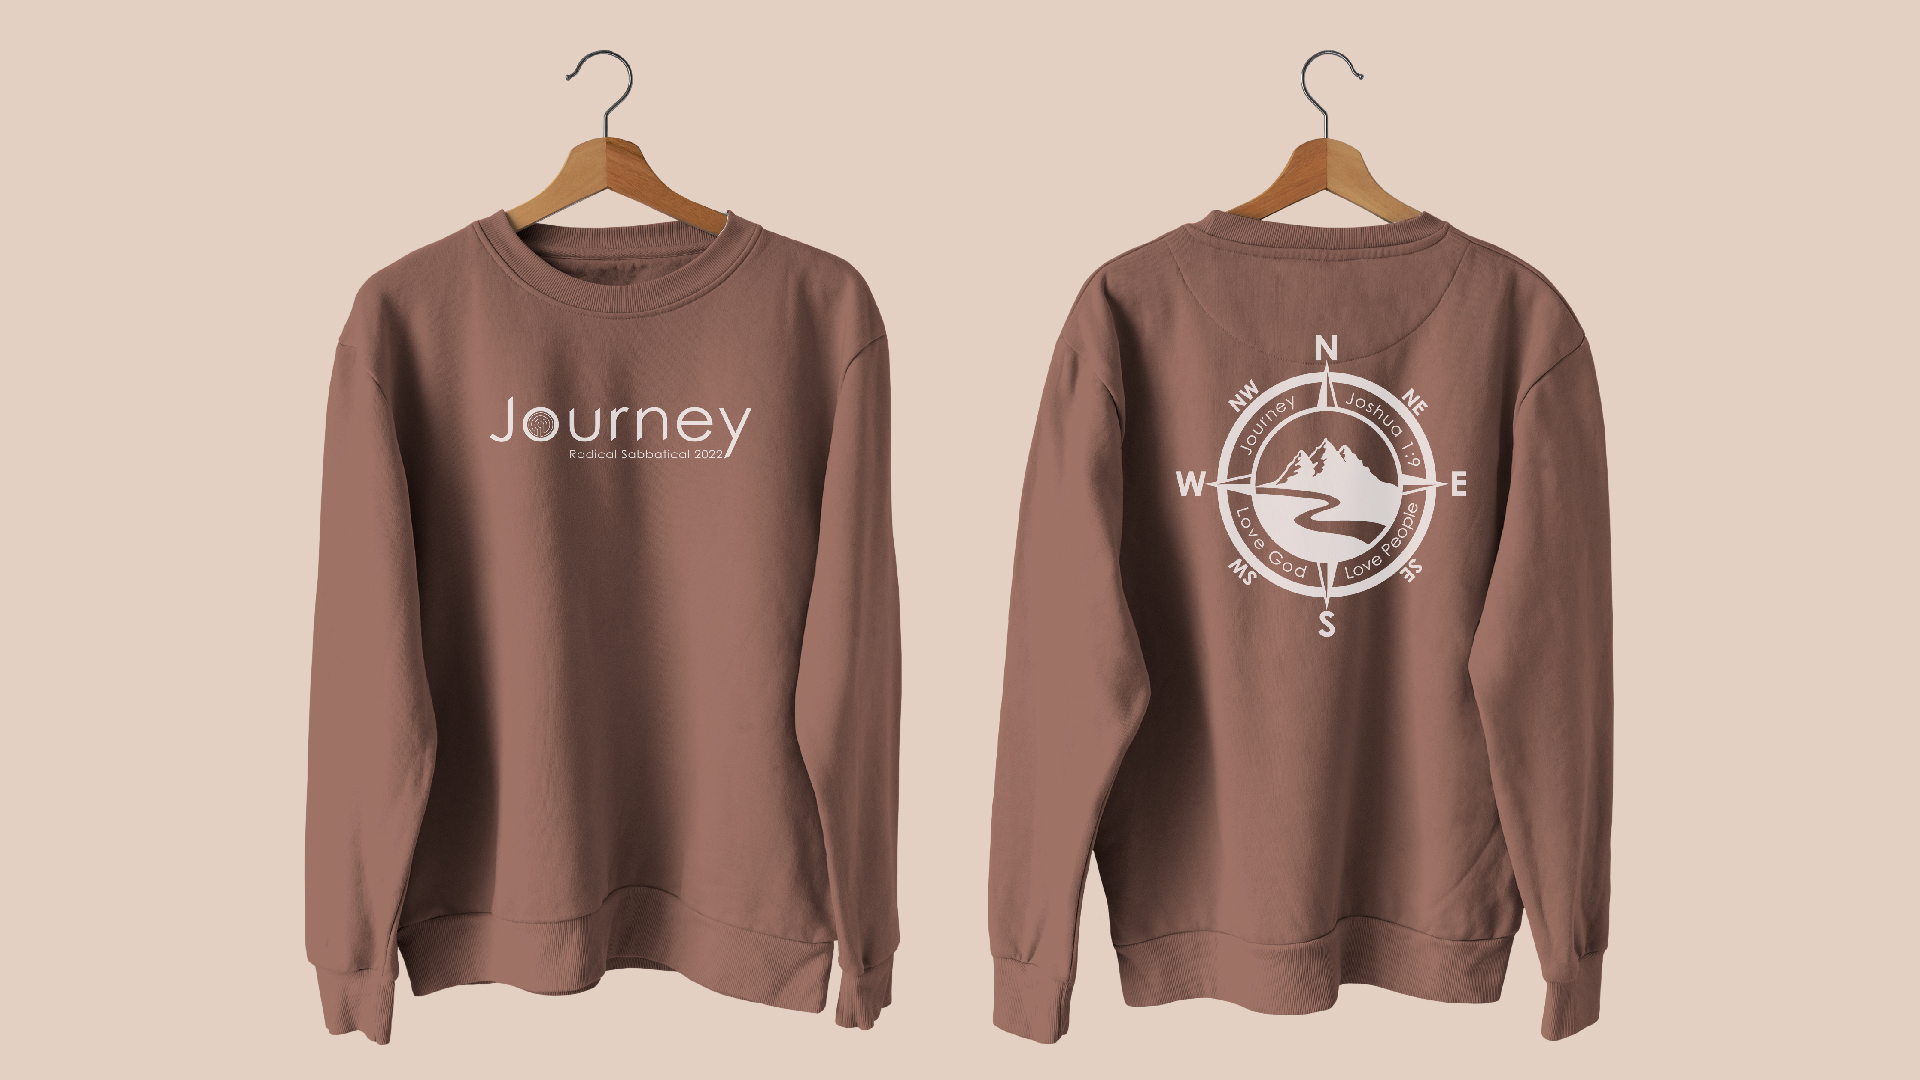 “CFUMC Retreat Sweatshirt” / “CFUMC Retreat Sweatshirt”, Sweatshirt Design, Adobe Illustrator and Photoshop, 8 x 2 inches front and 7 x 7 inches back printed on apparel, 2022. This shirt design focused on the theme of “Journey”, and was designed for a church’s retreat.